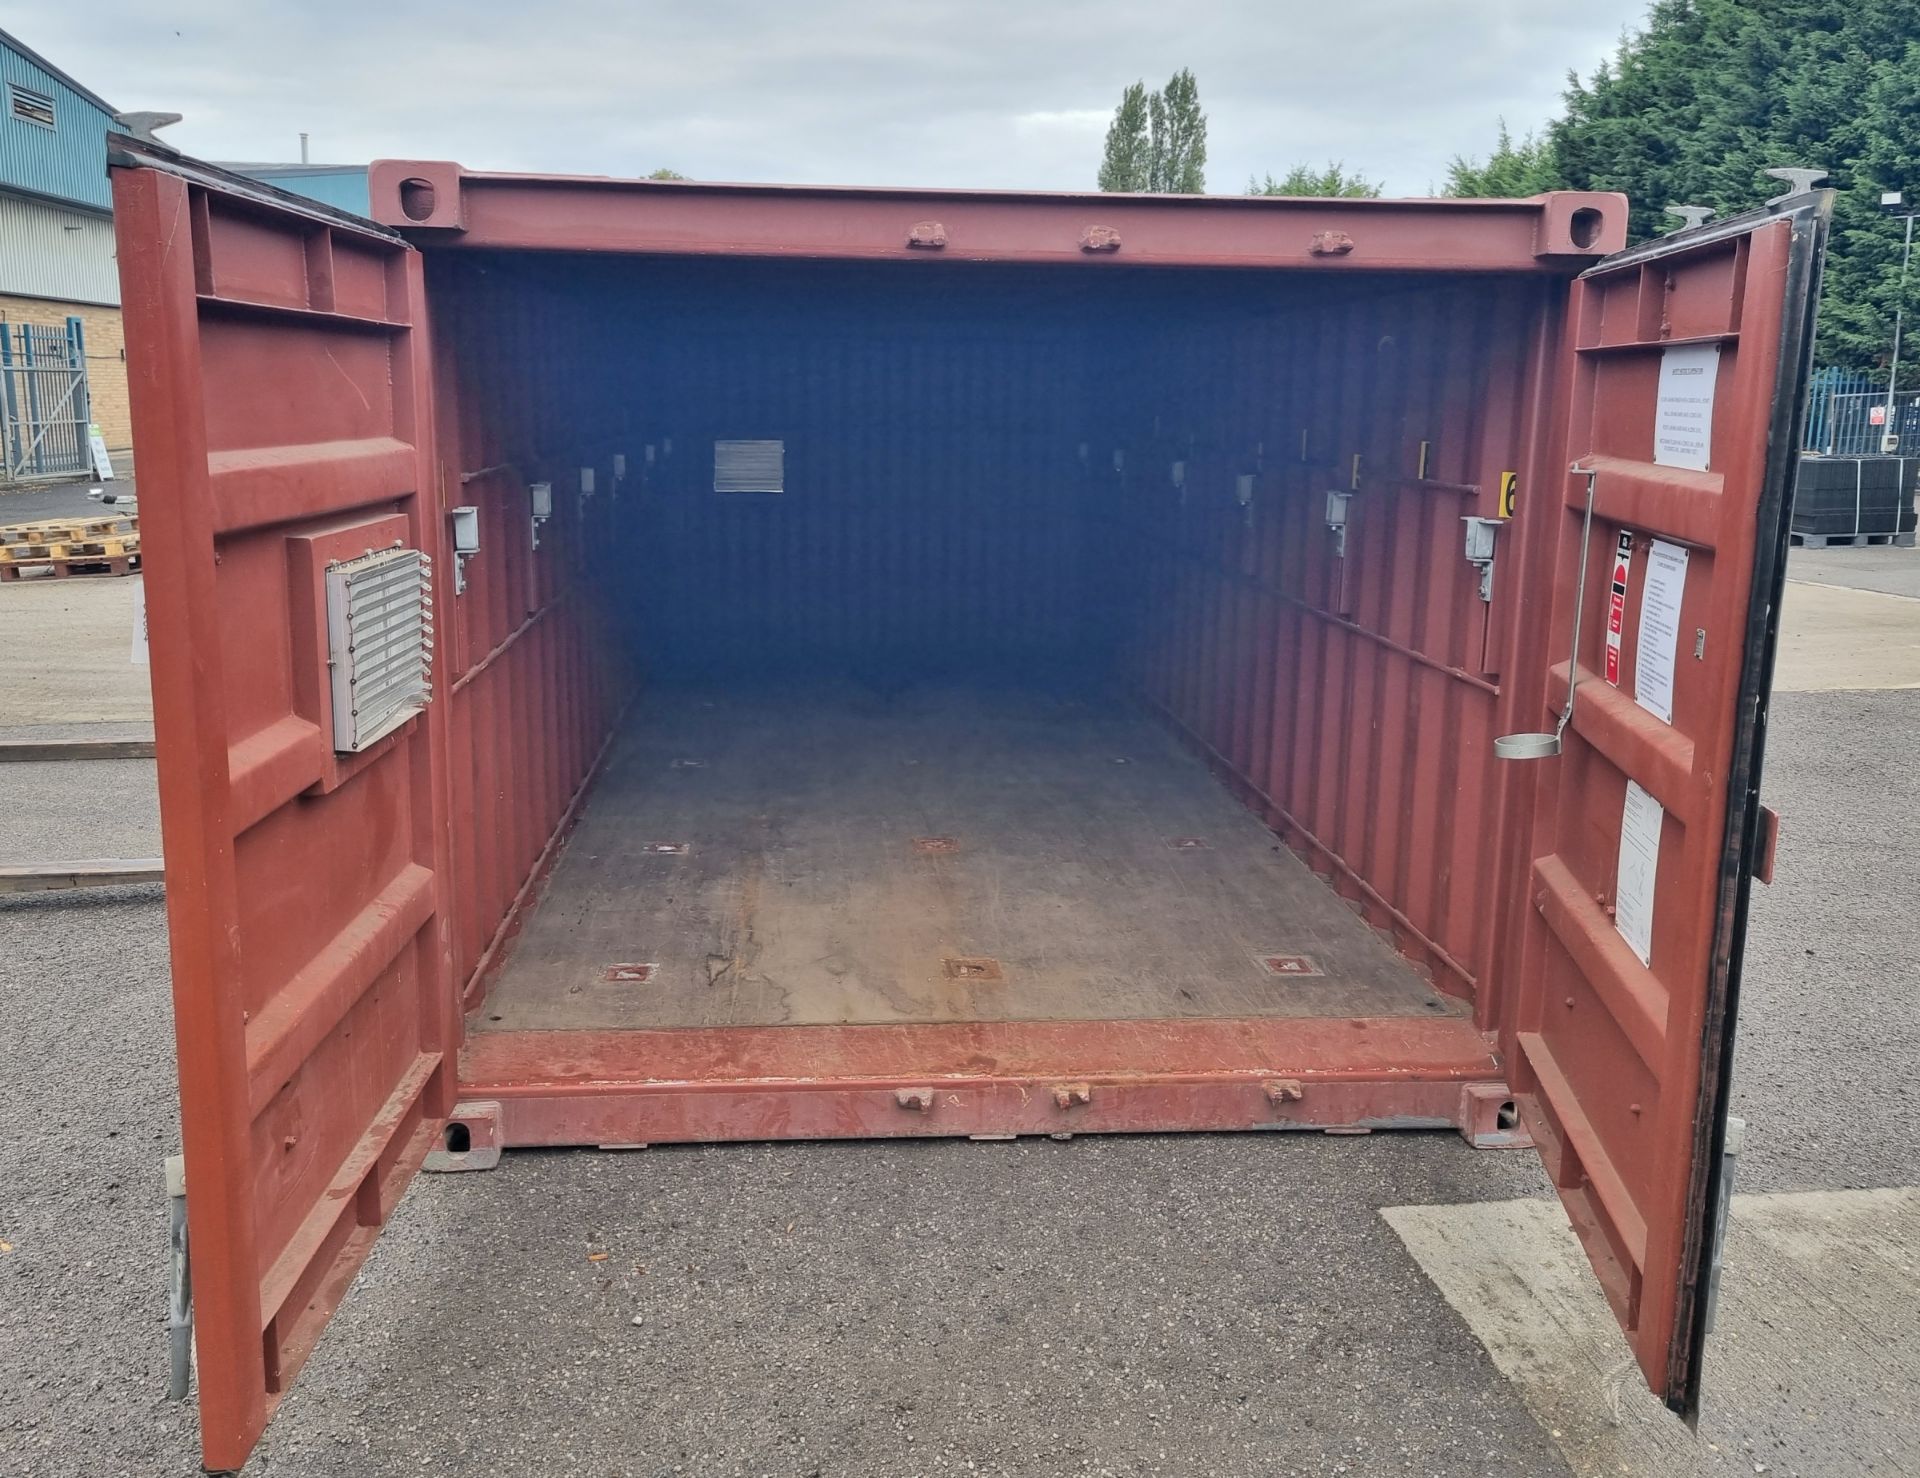 Stonehaven Engineering Ltd transportable storage container ISO 499/99/01 - dimensions: 20ft x 8ft x - Image 5 of 6